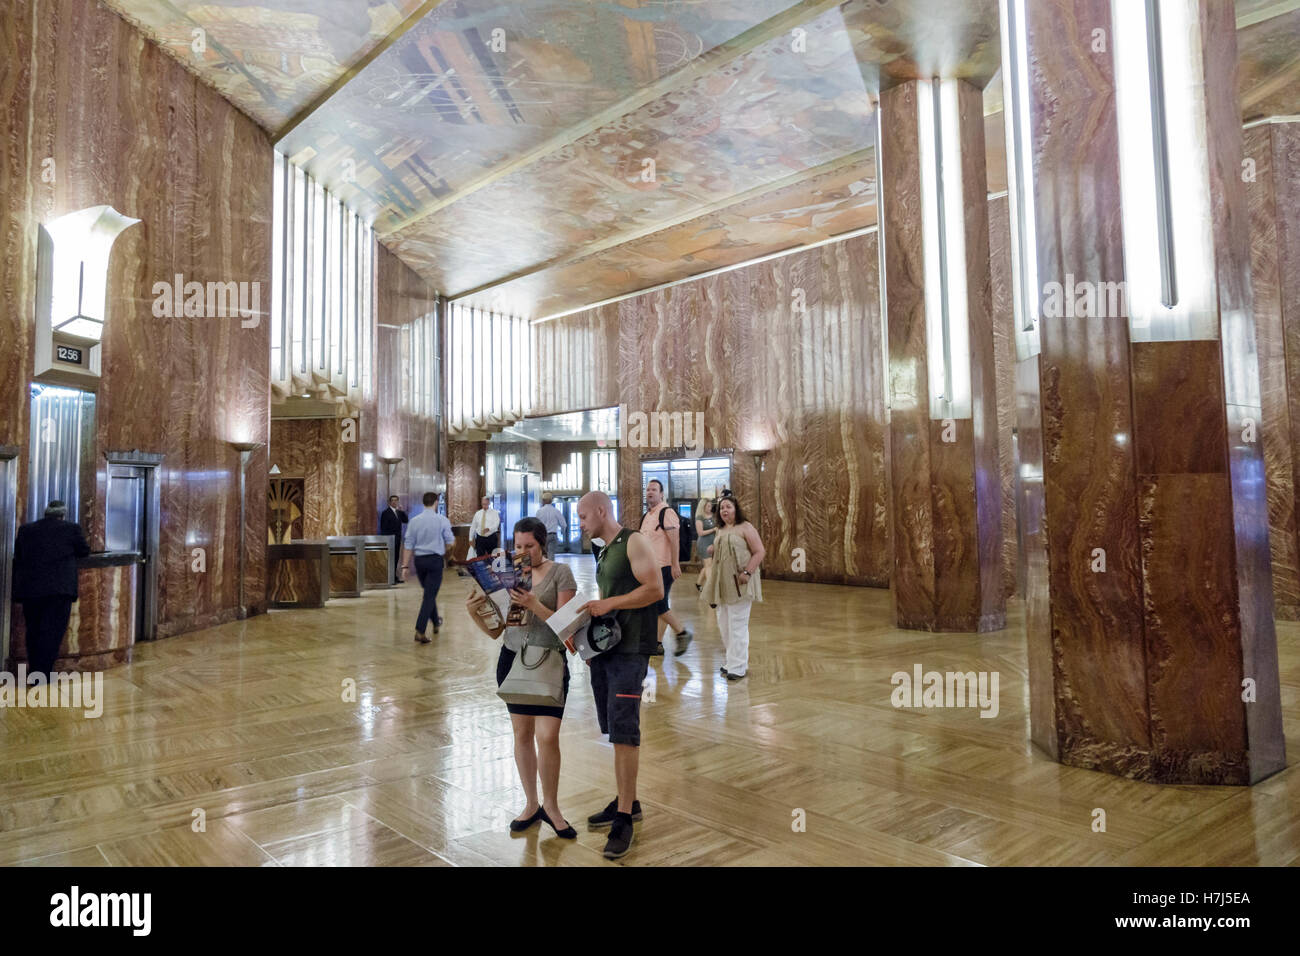 New York City, NY NYC Manhattan, Midtown, 42nd Street, Chrysler Building, hall, marbre, Art déco, adulte, homme hommes, femme femmes, couple, plafond Banque D'Images